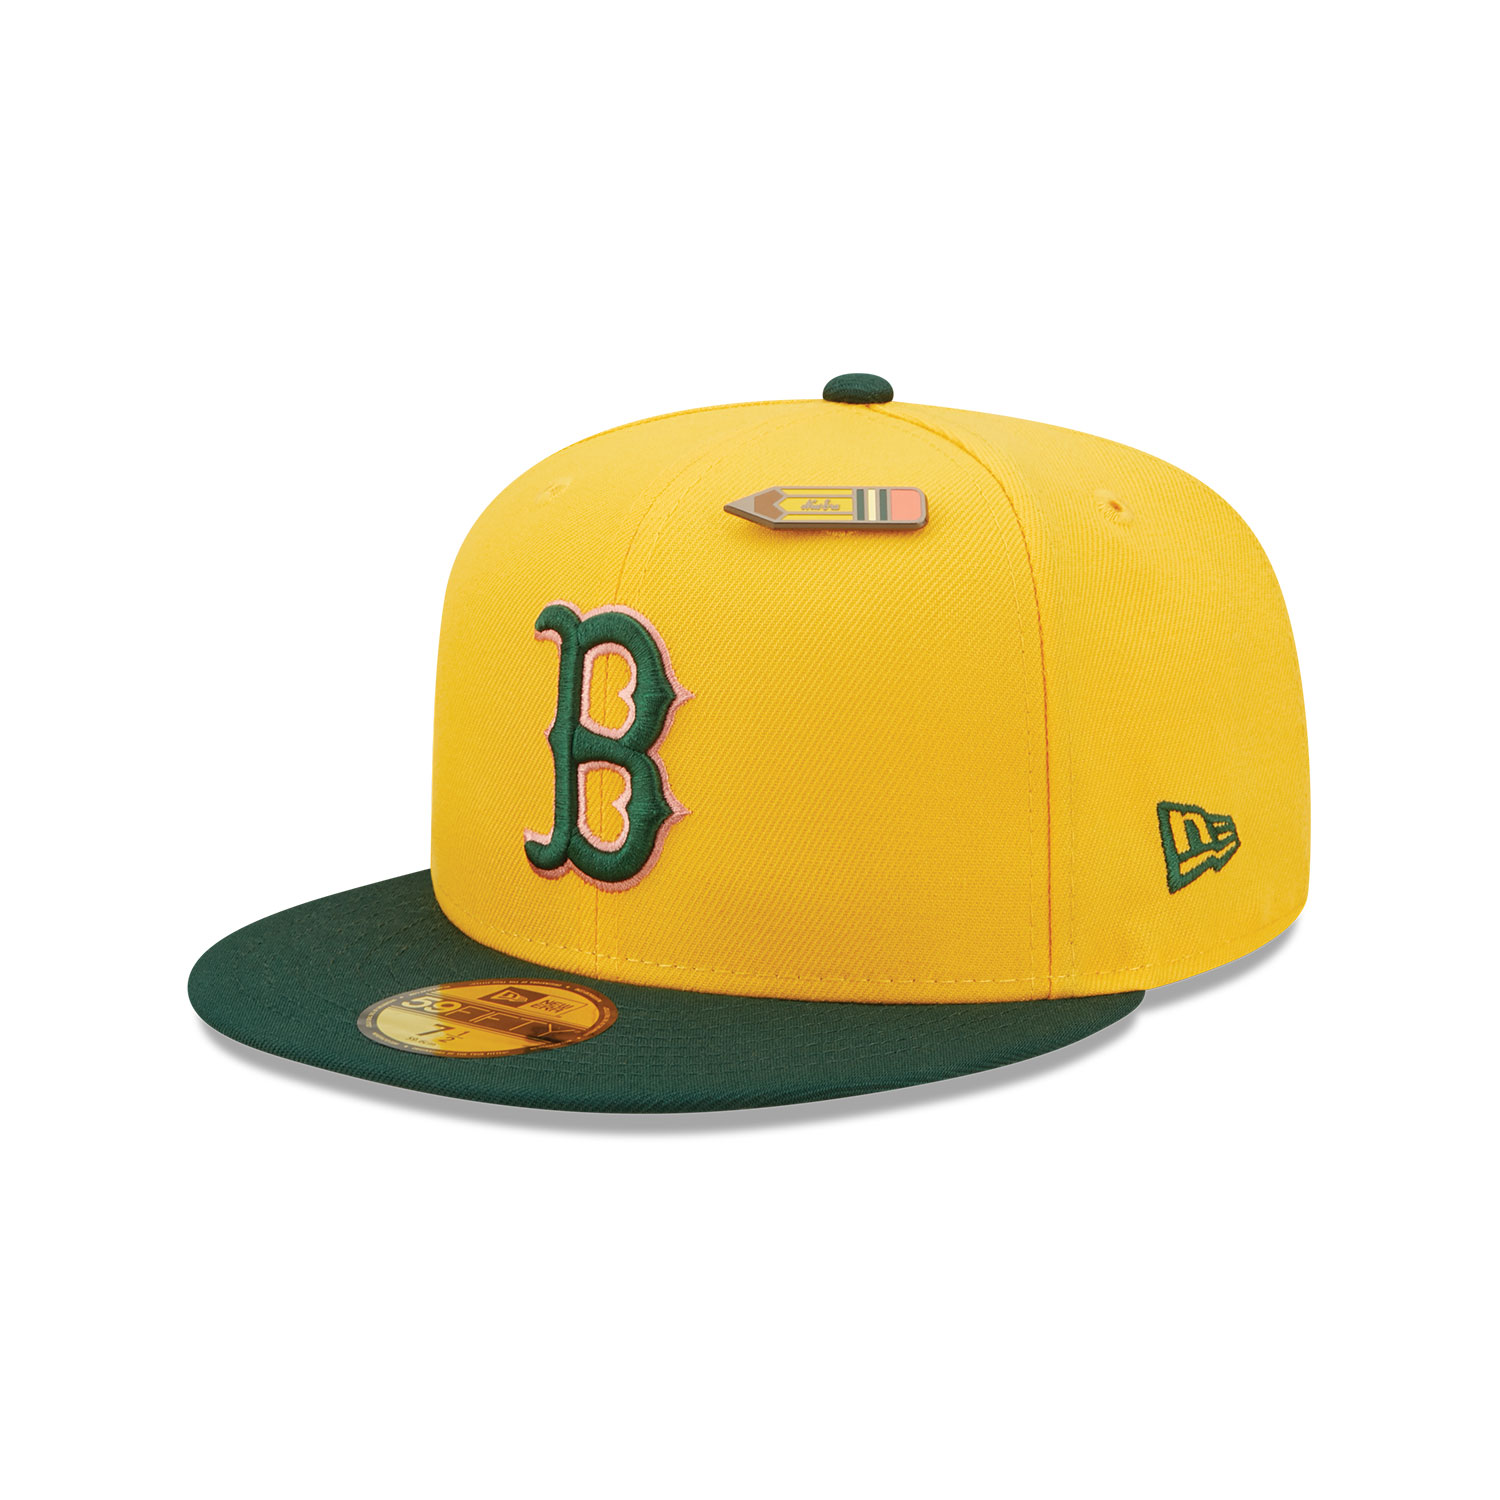 Official New Era Boston Red Sox MLB Back to School Yellow 59FIFTY